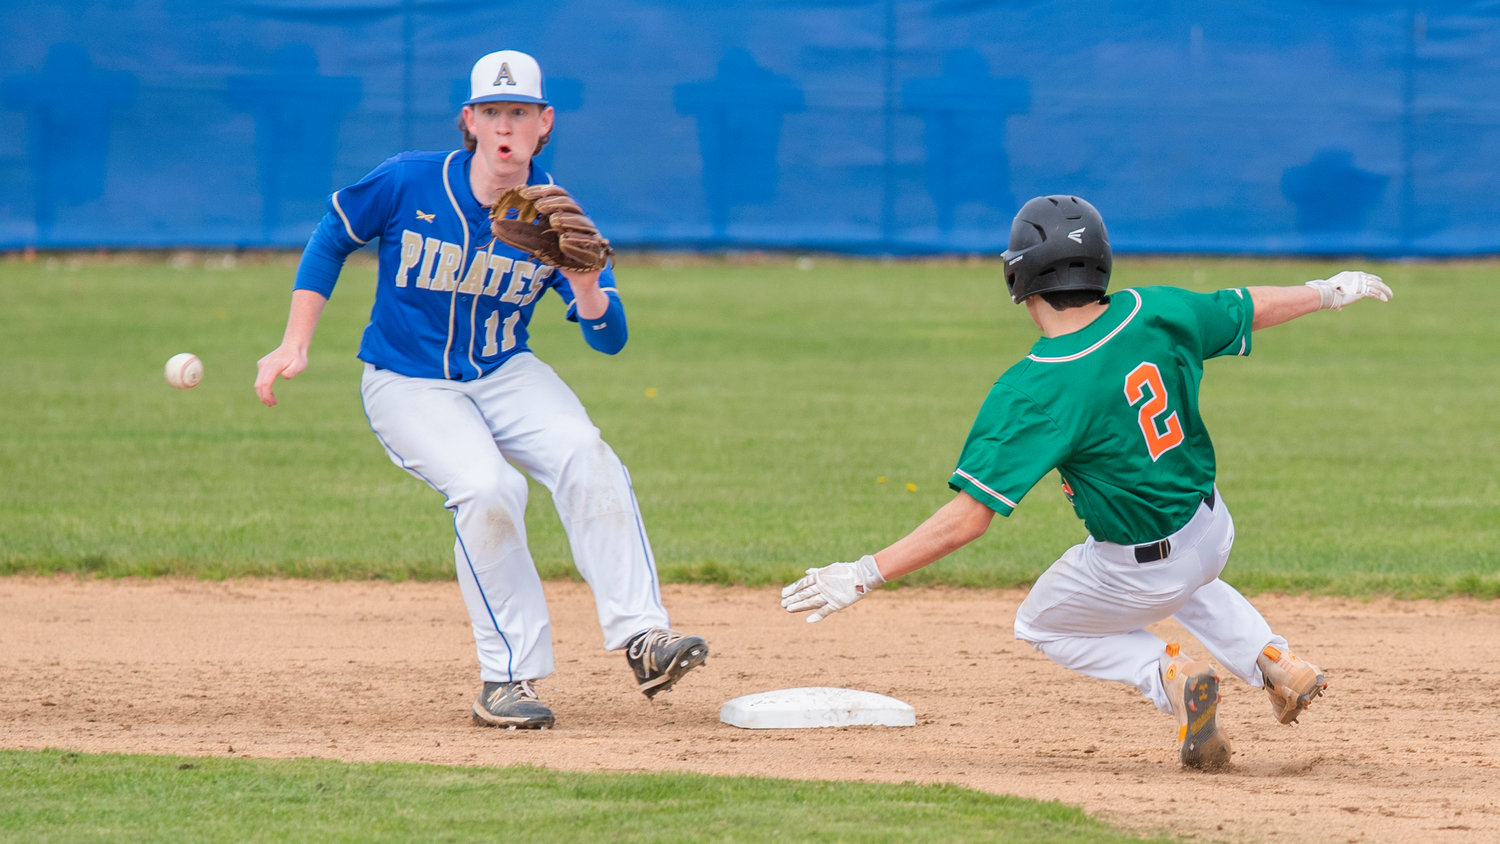 Adna’s Chance Muller receives a throw down to second base during a game against Morton-White Pass Monday afternoon.